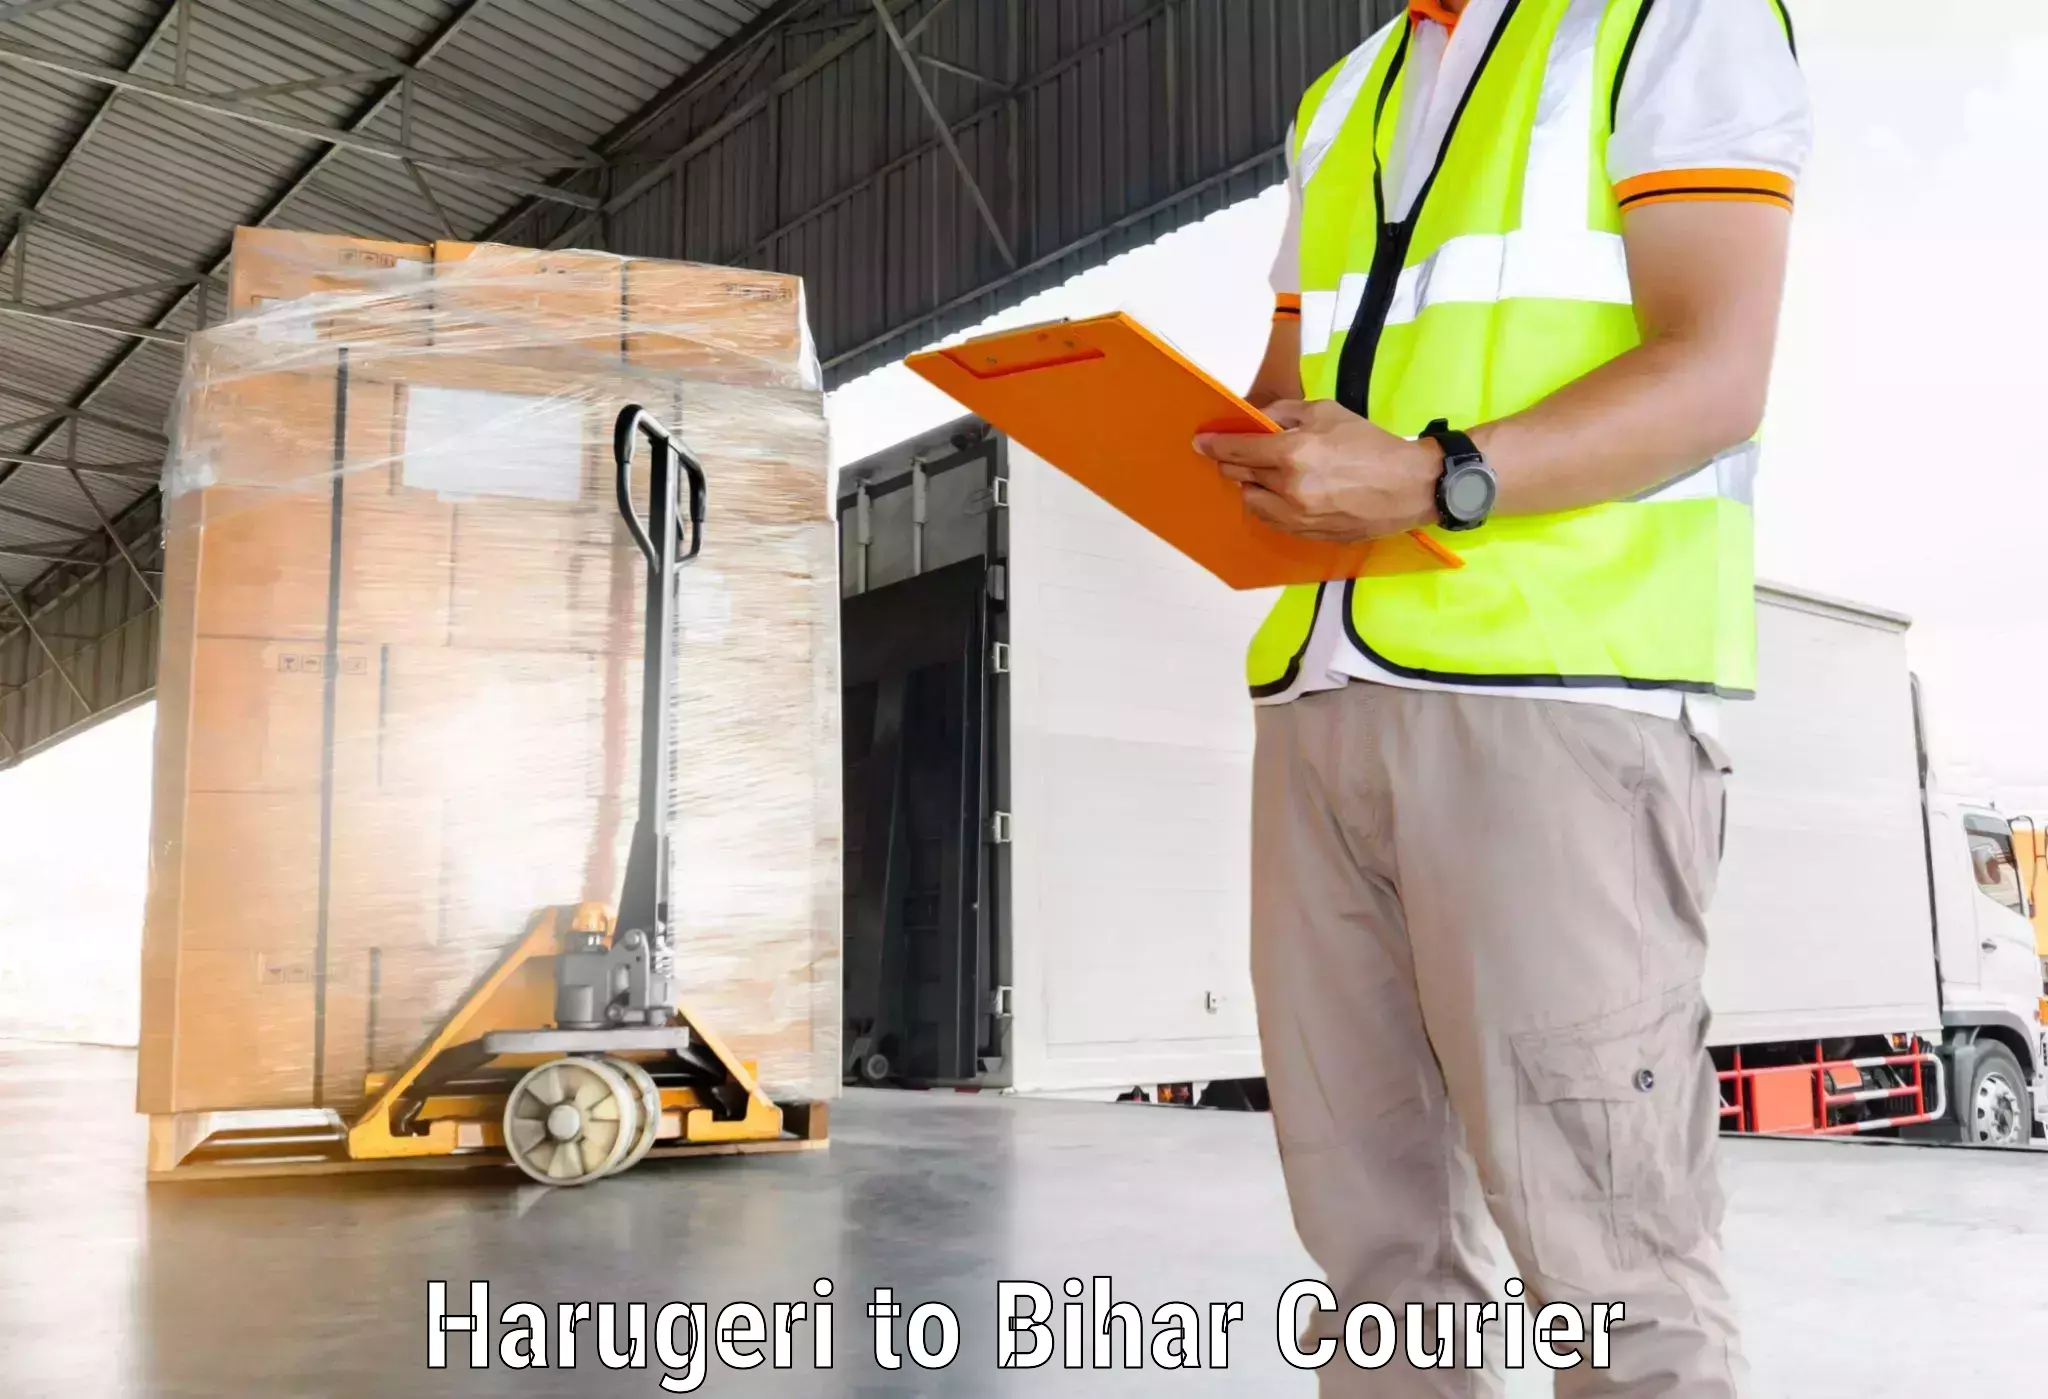 Quick courier services Harugeri to Dhaka